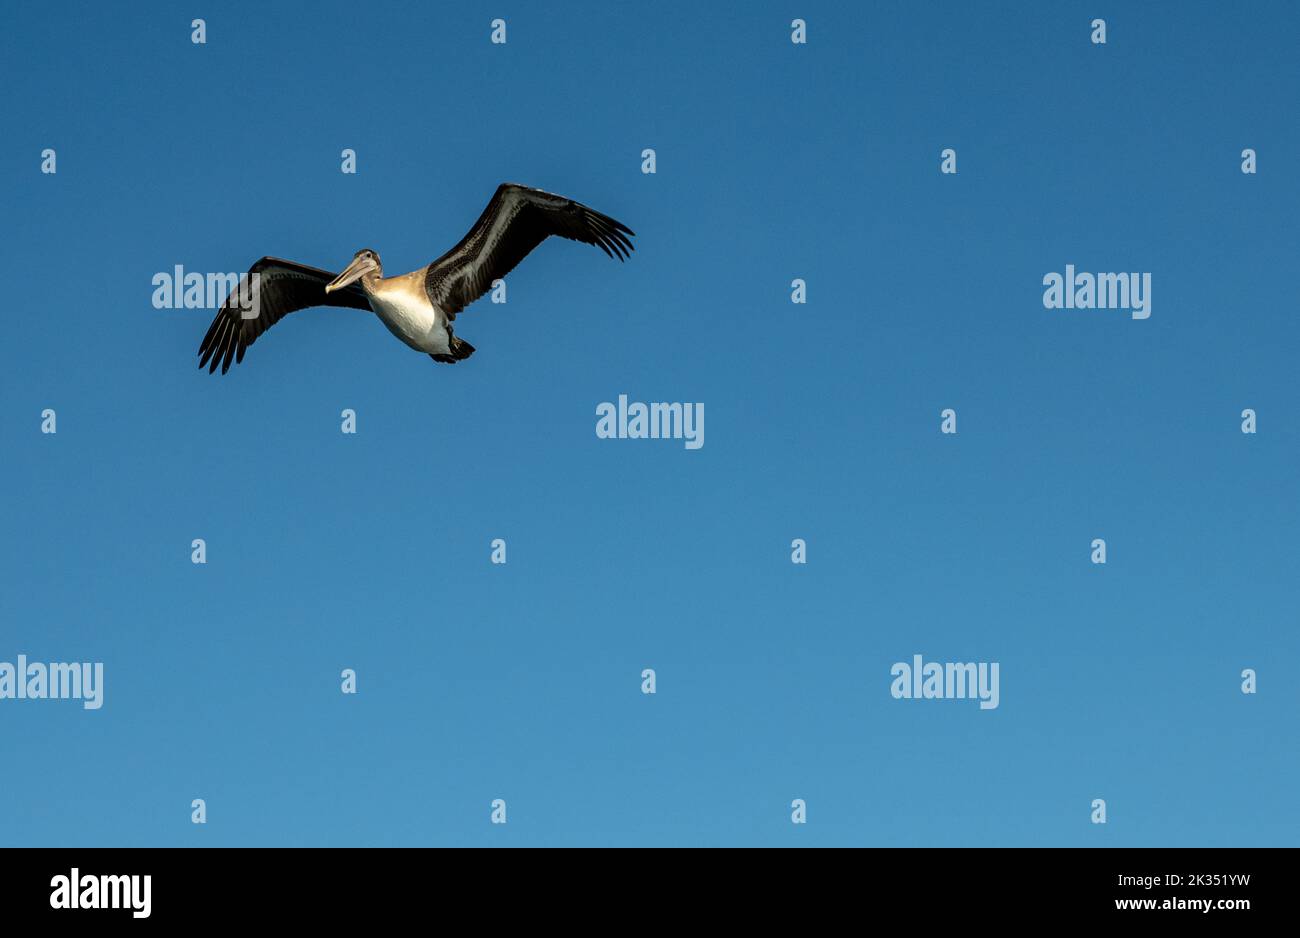 Looking Up at Large Pelican On Blue Sky in Channel Islands National Park Stock Photo